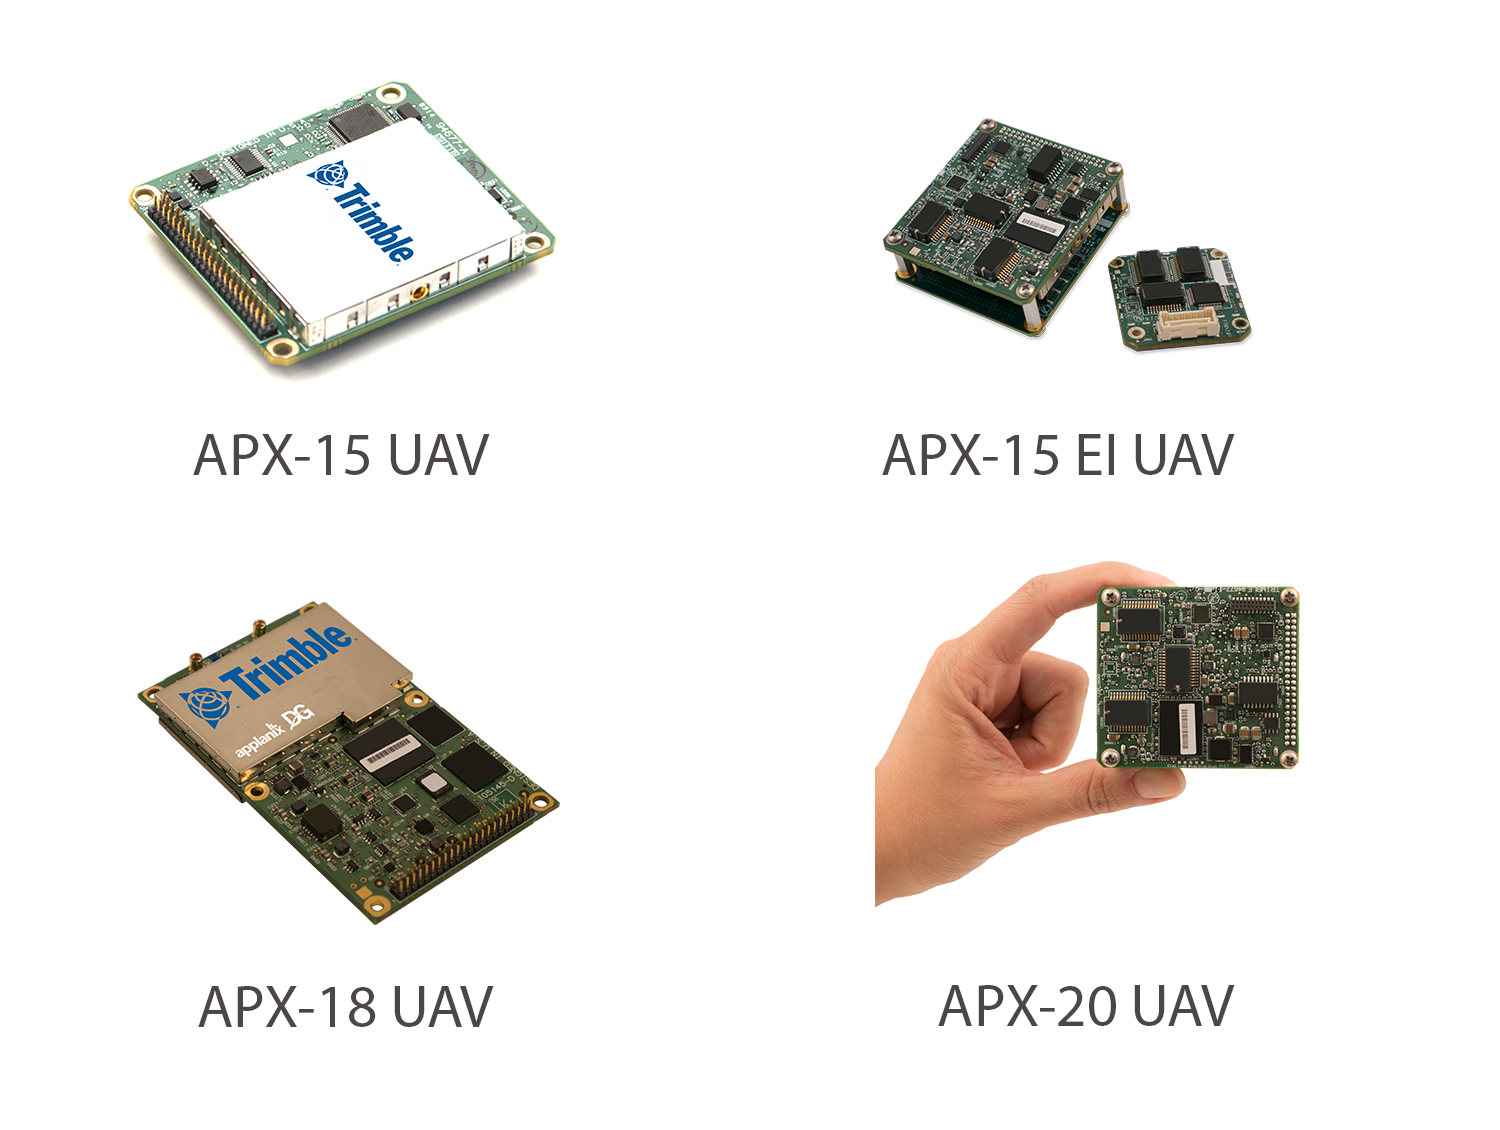 APX Family of OEM Boards